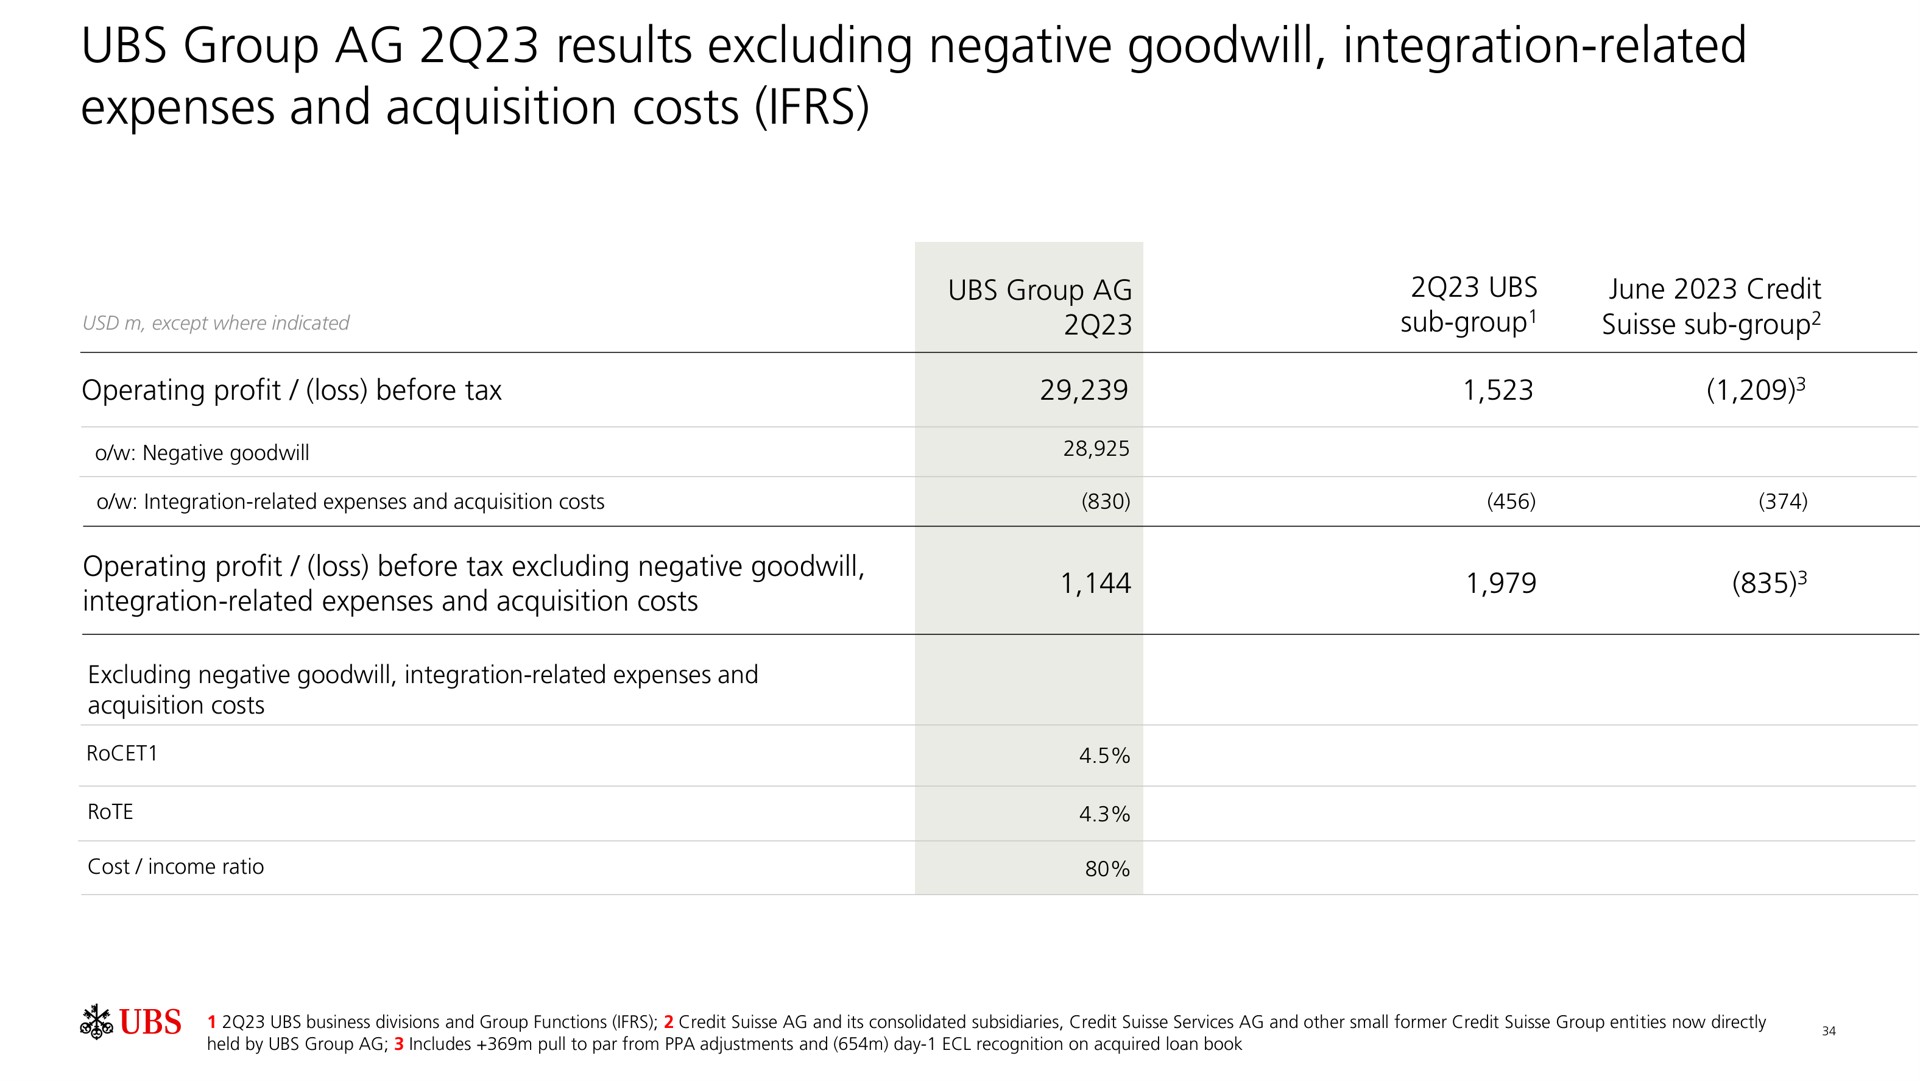 group results excluding negative goodwill integration related expenses and acquisition costs | UBS